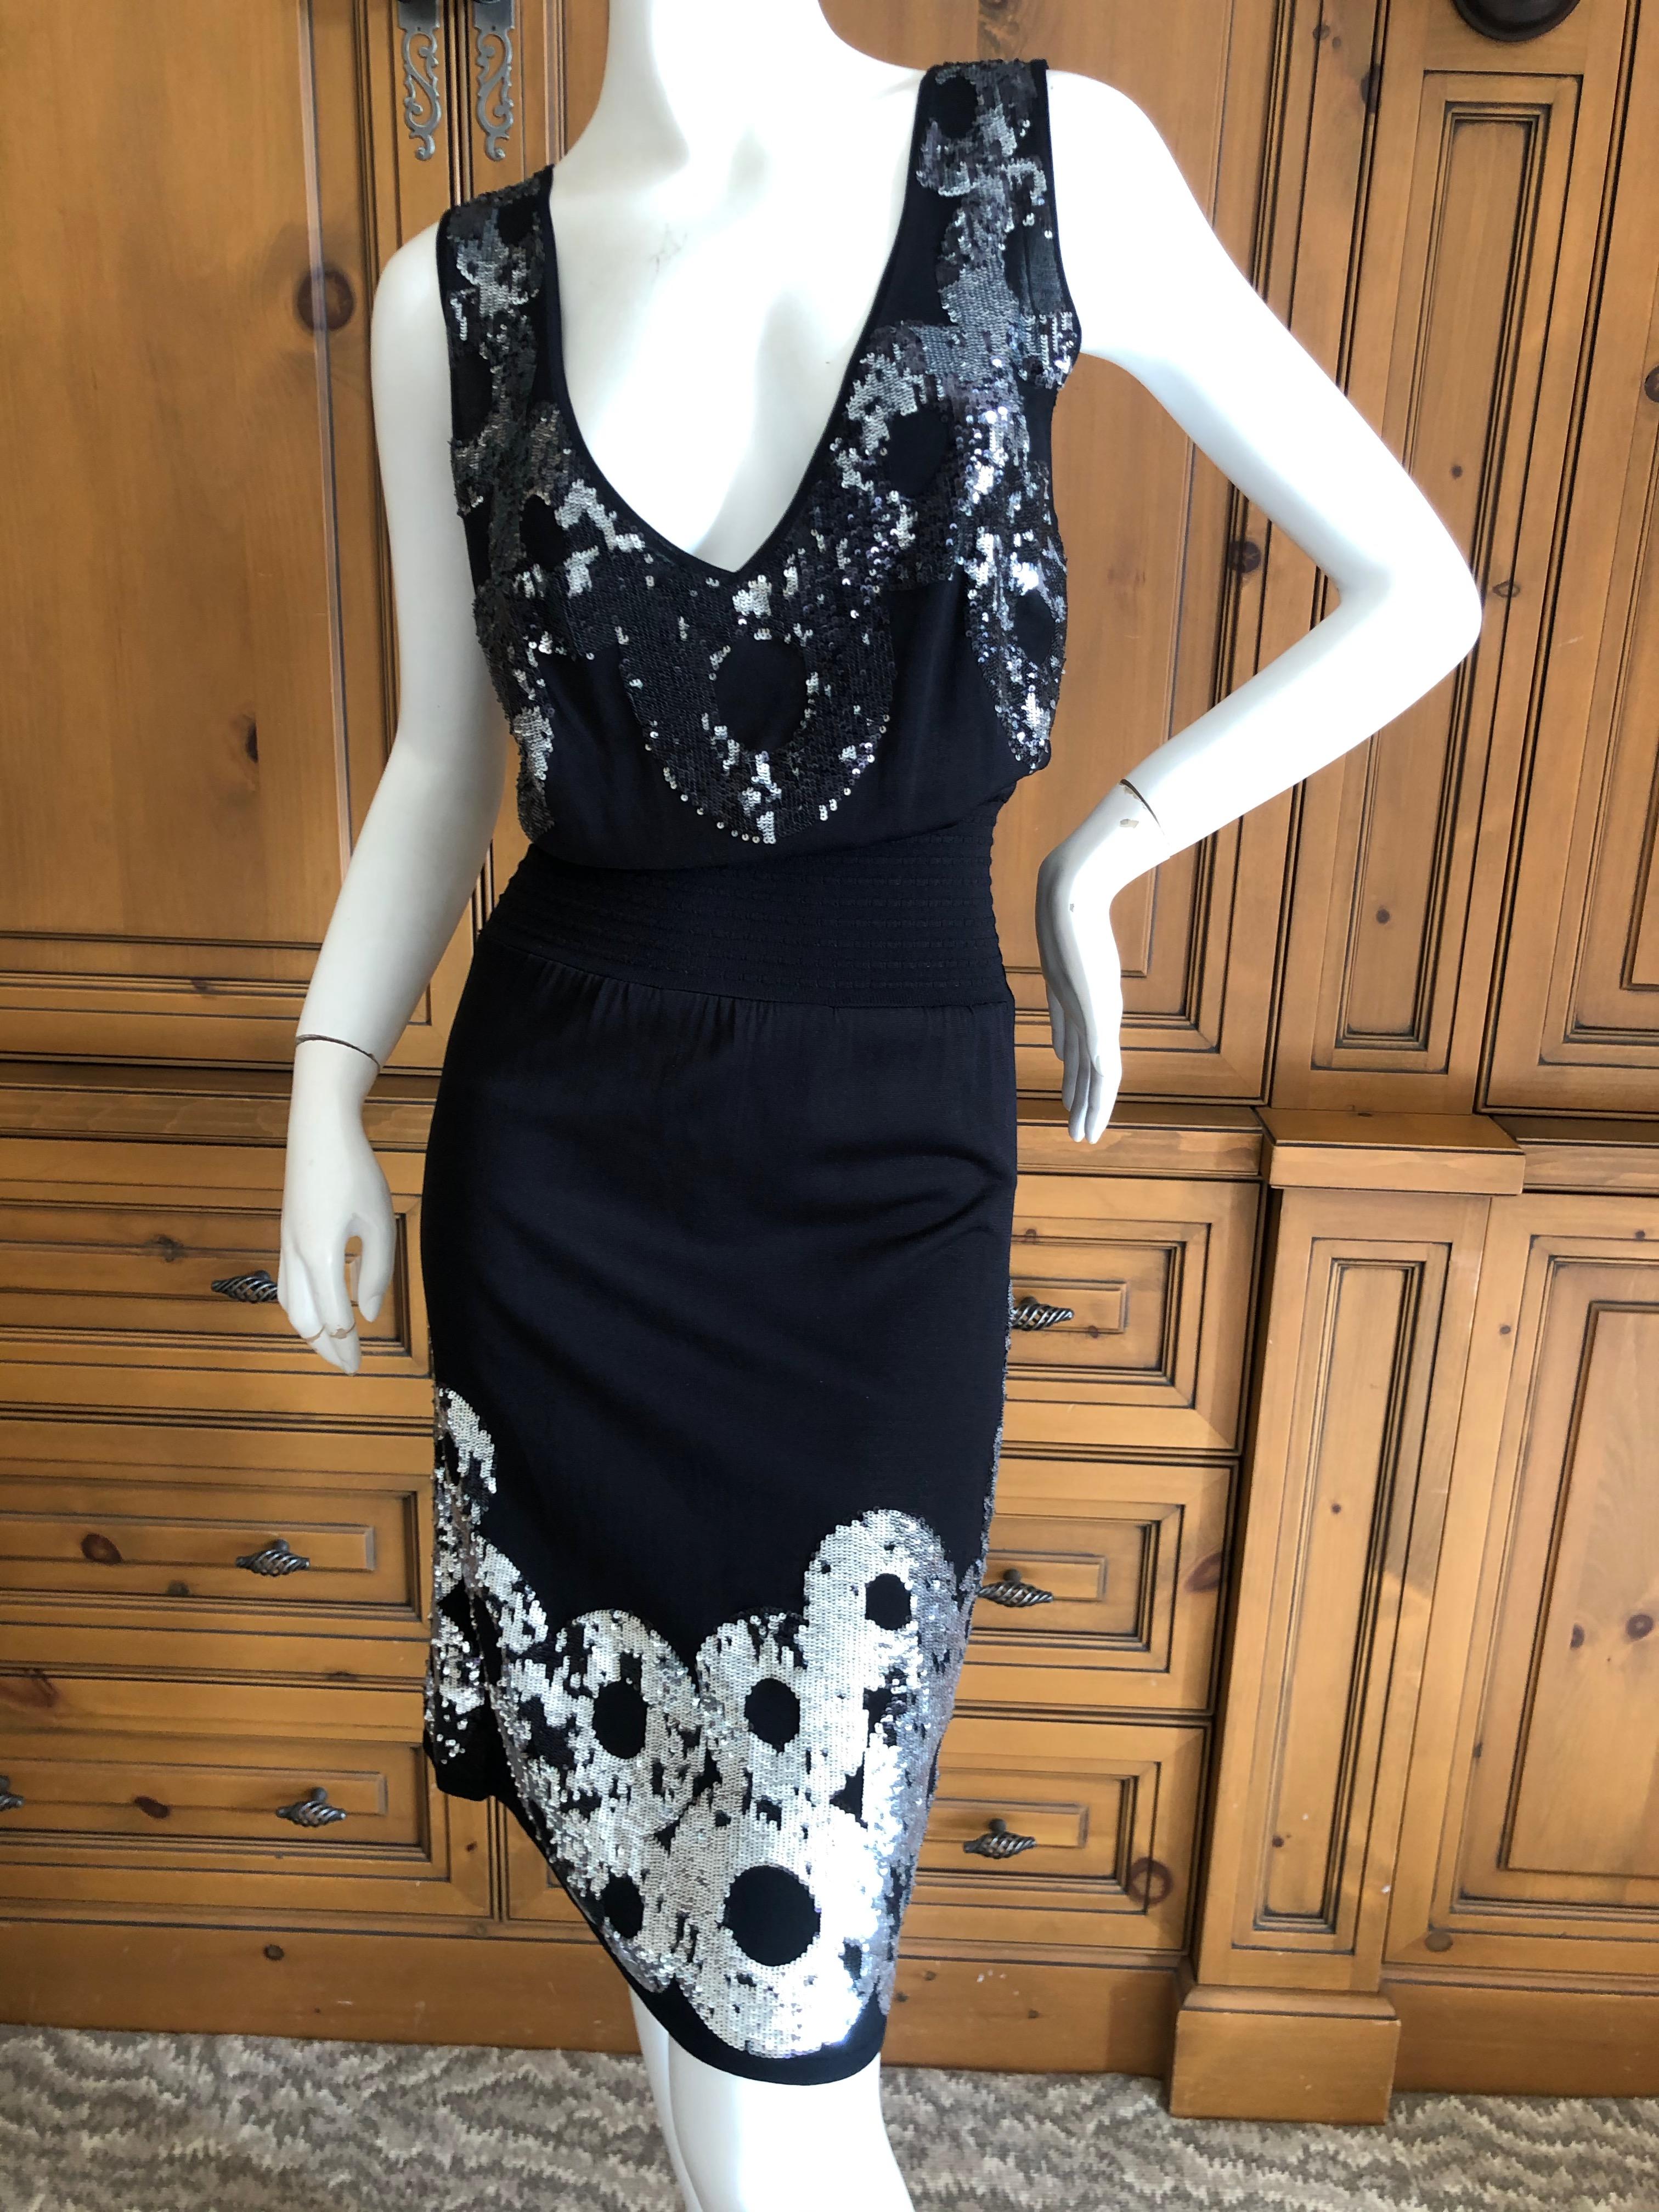  Roberto Cavalli for Class Cavalli Sequin Little Black Knit Cocktail Dress In Excellent Condition For Sale In Cloverdale, CA